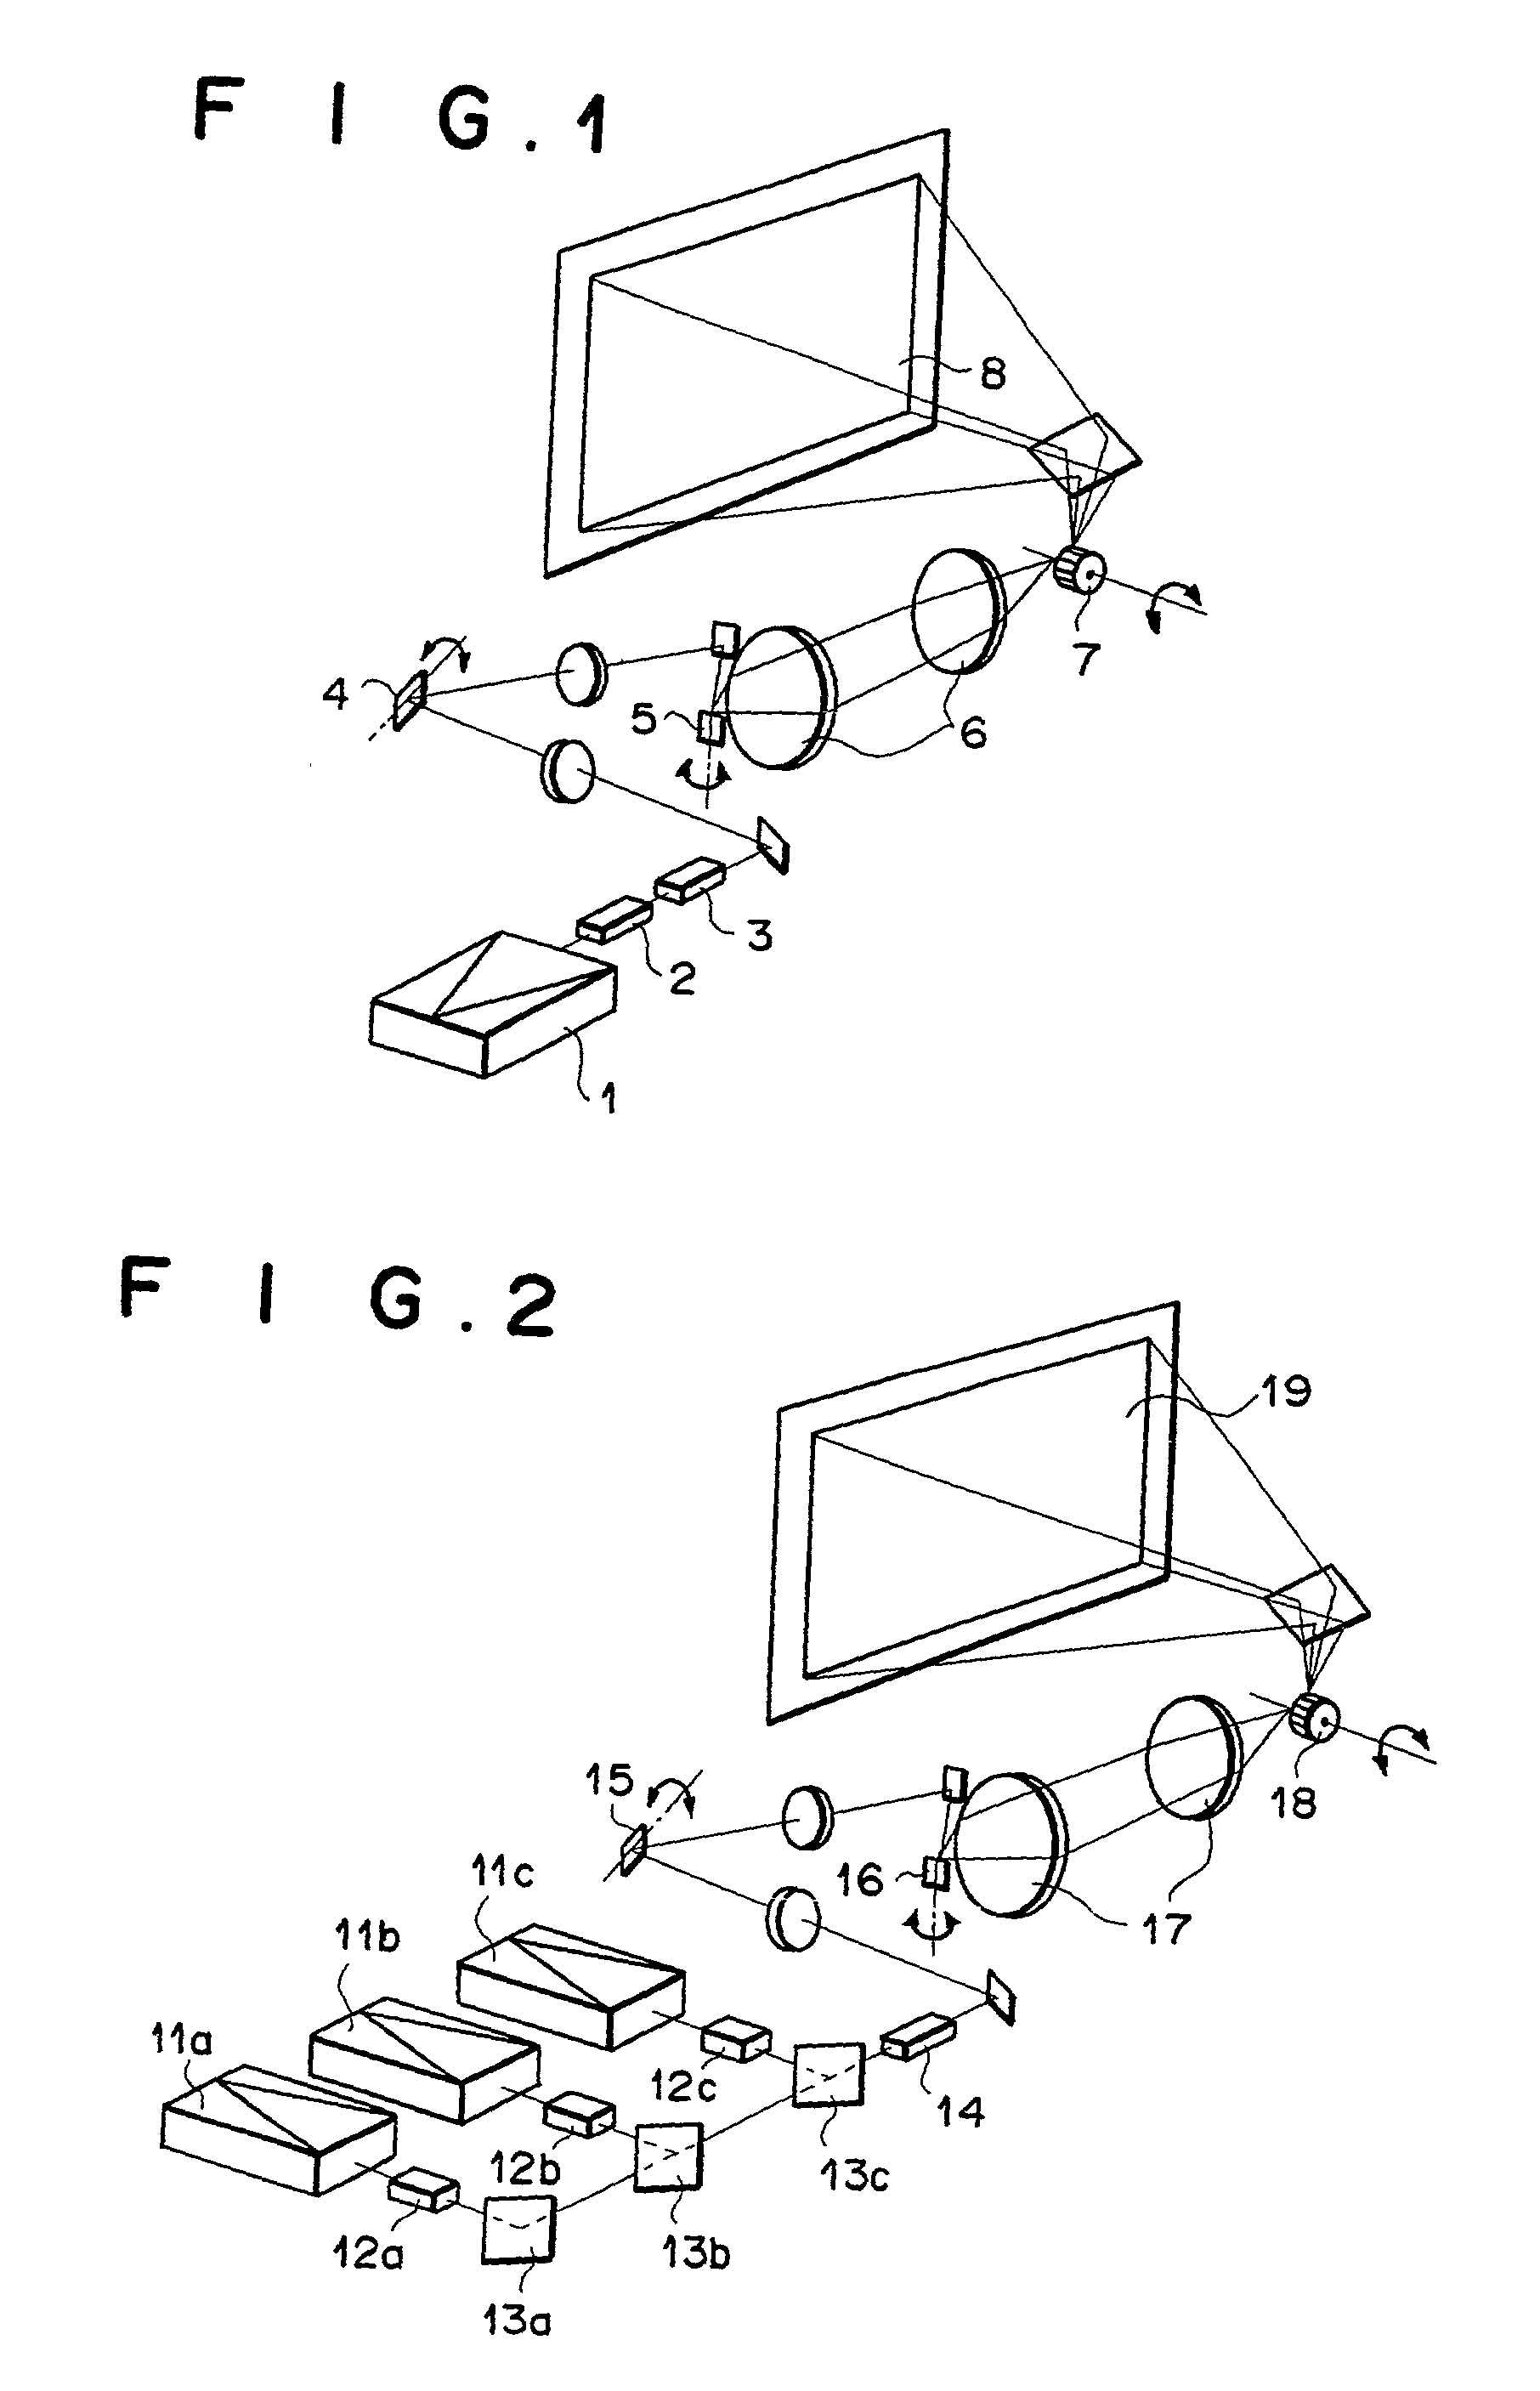 Color laser display apparatus having fluorescent screen scanned with modulated ultraviolet laser light